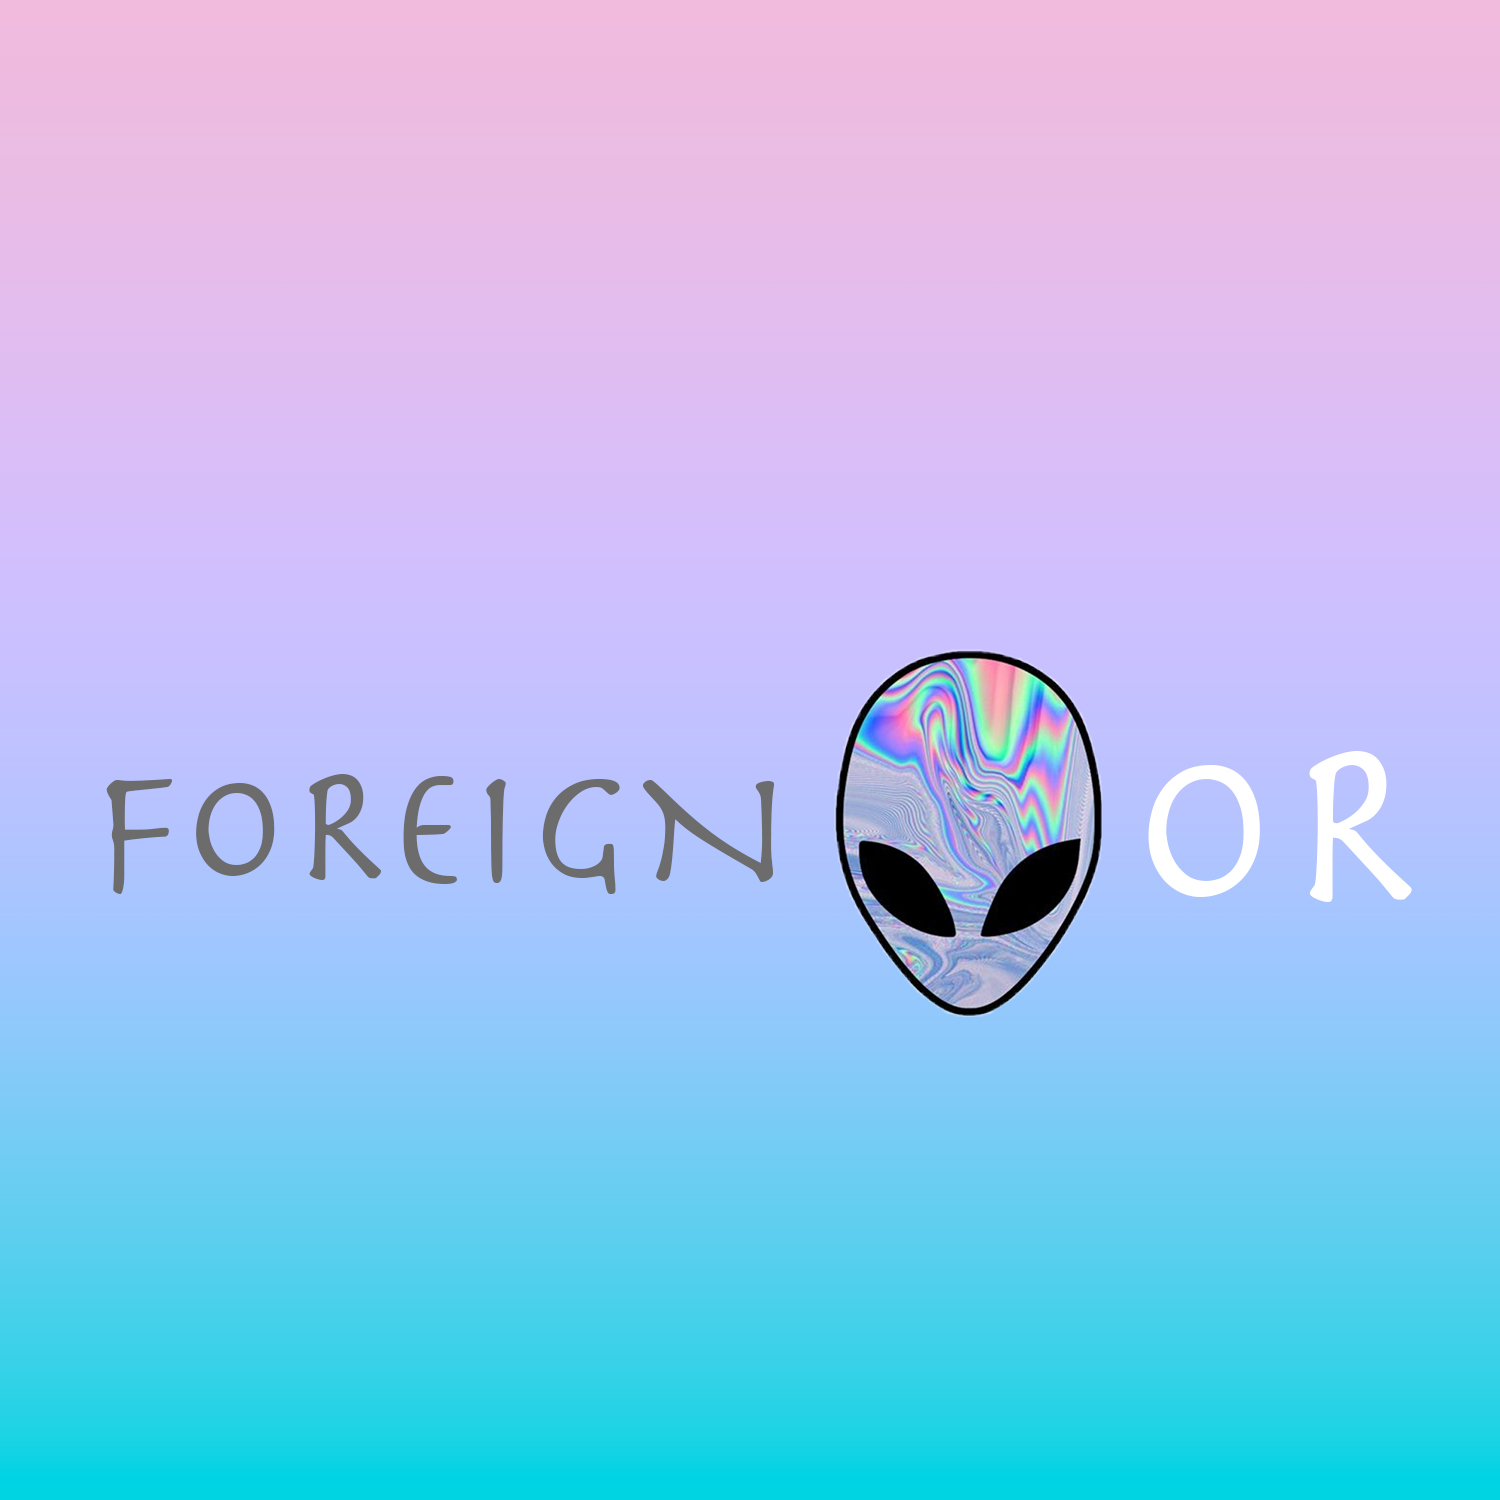 Foreign, Or